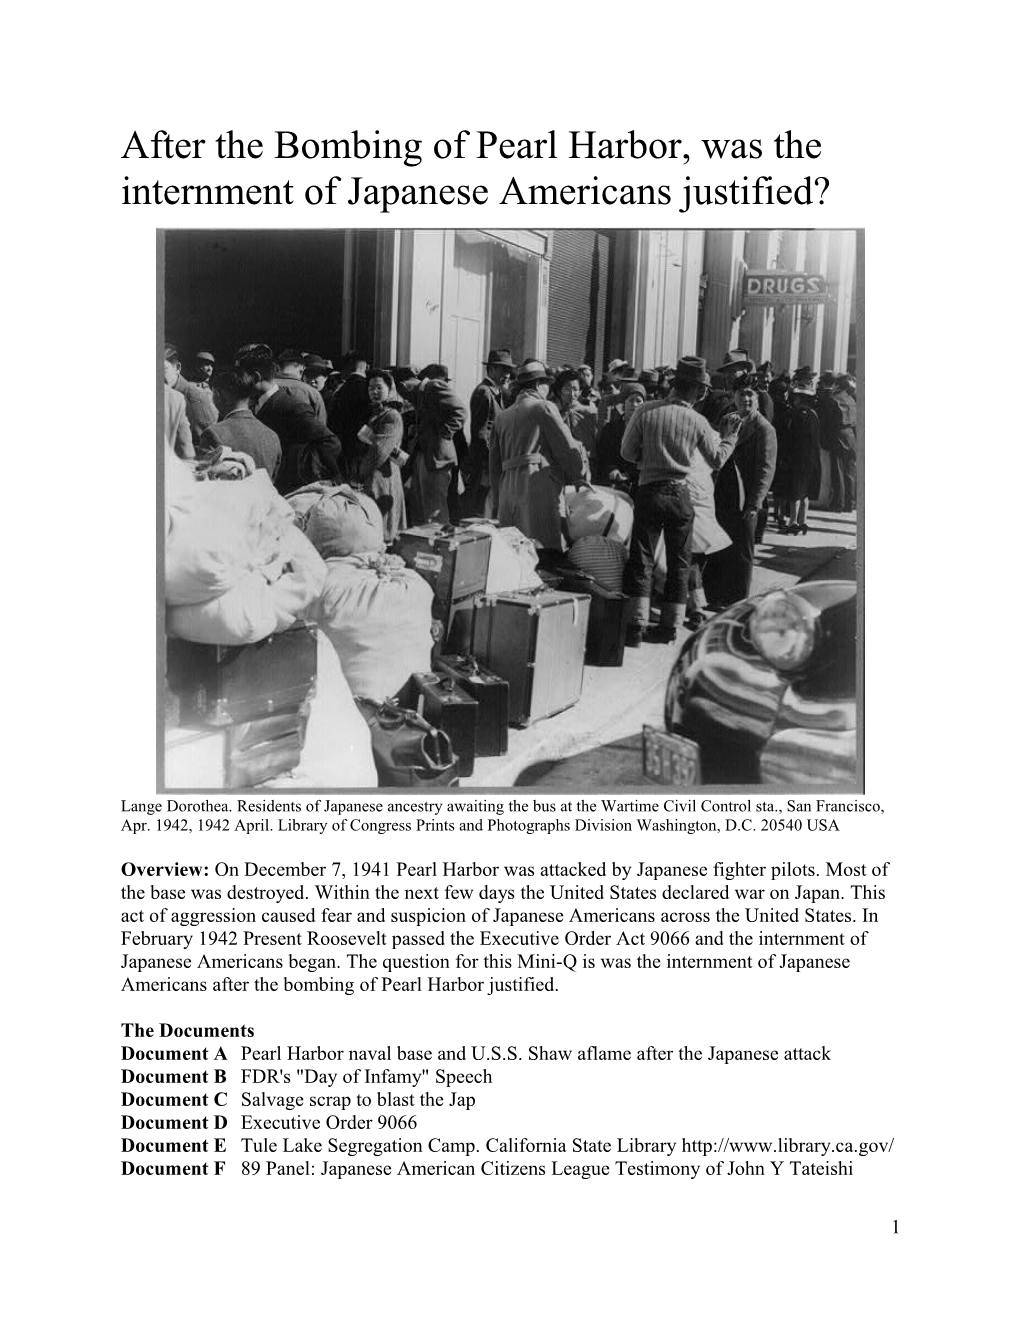 After the Bombing of Pearl Harbor, Was the Internment of Japanese Americans Justified?